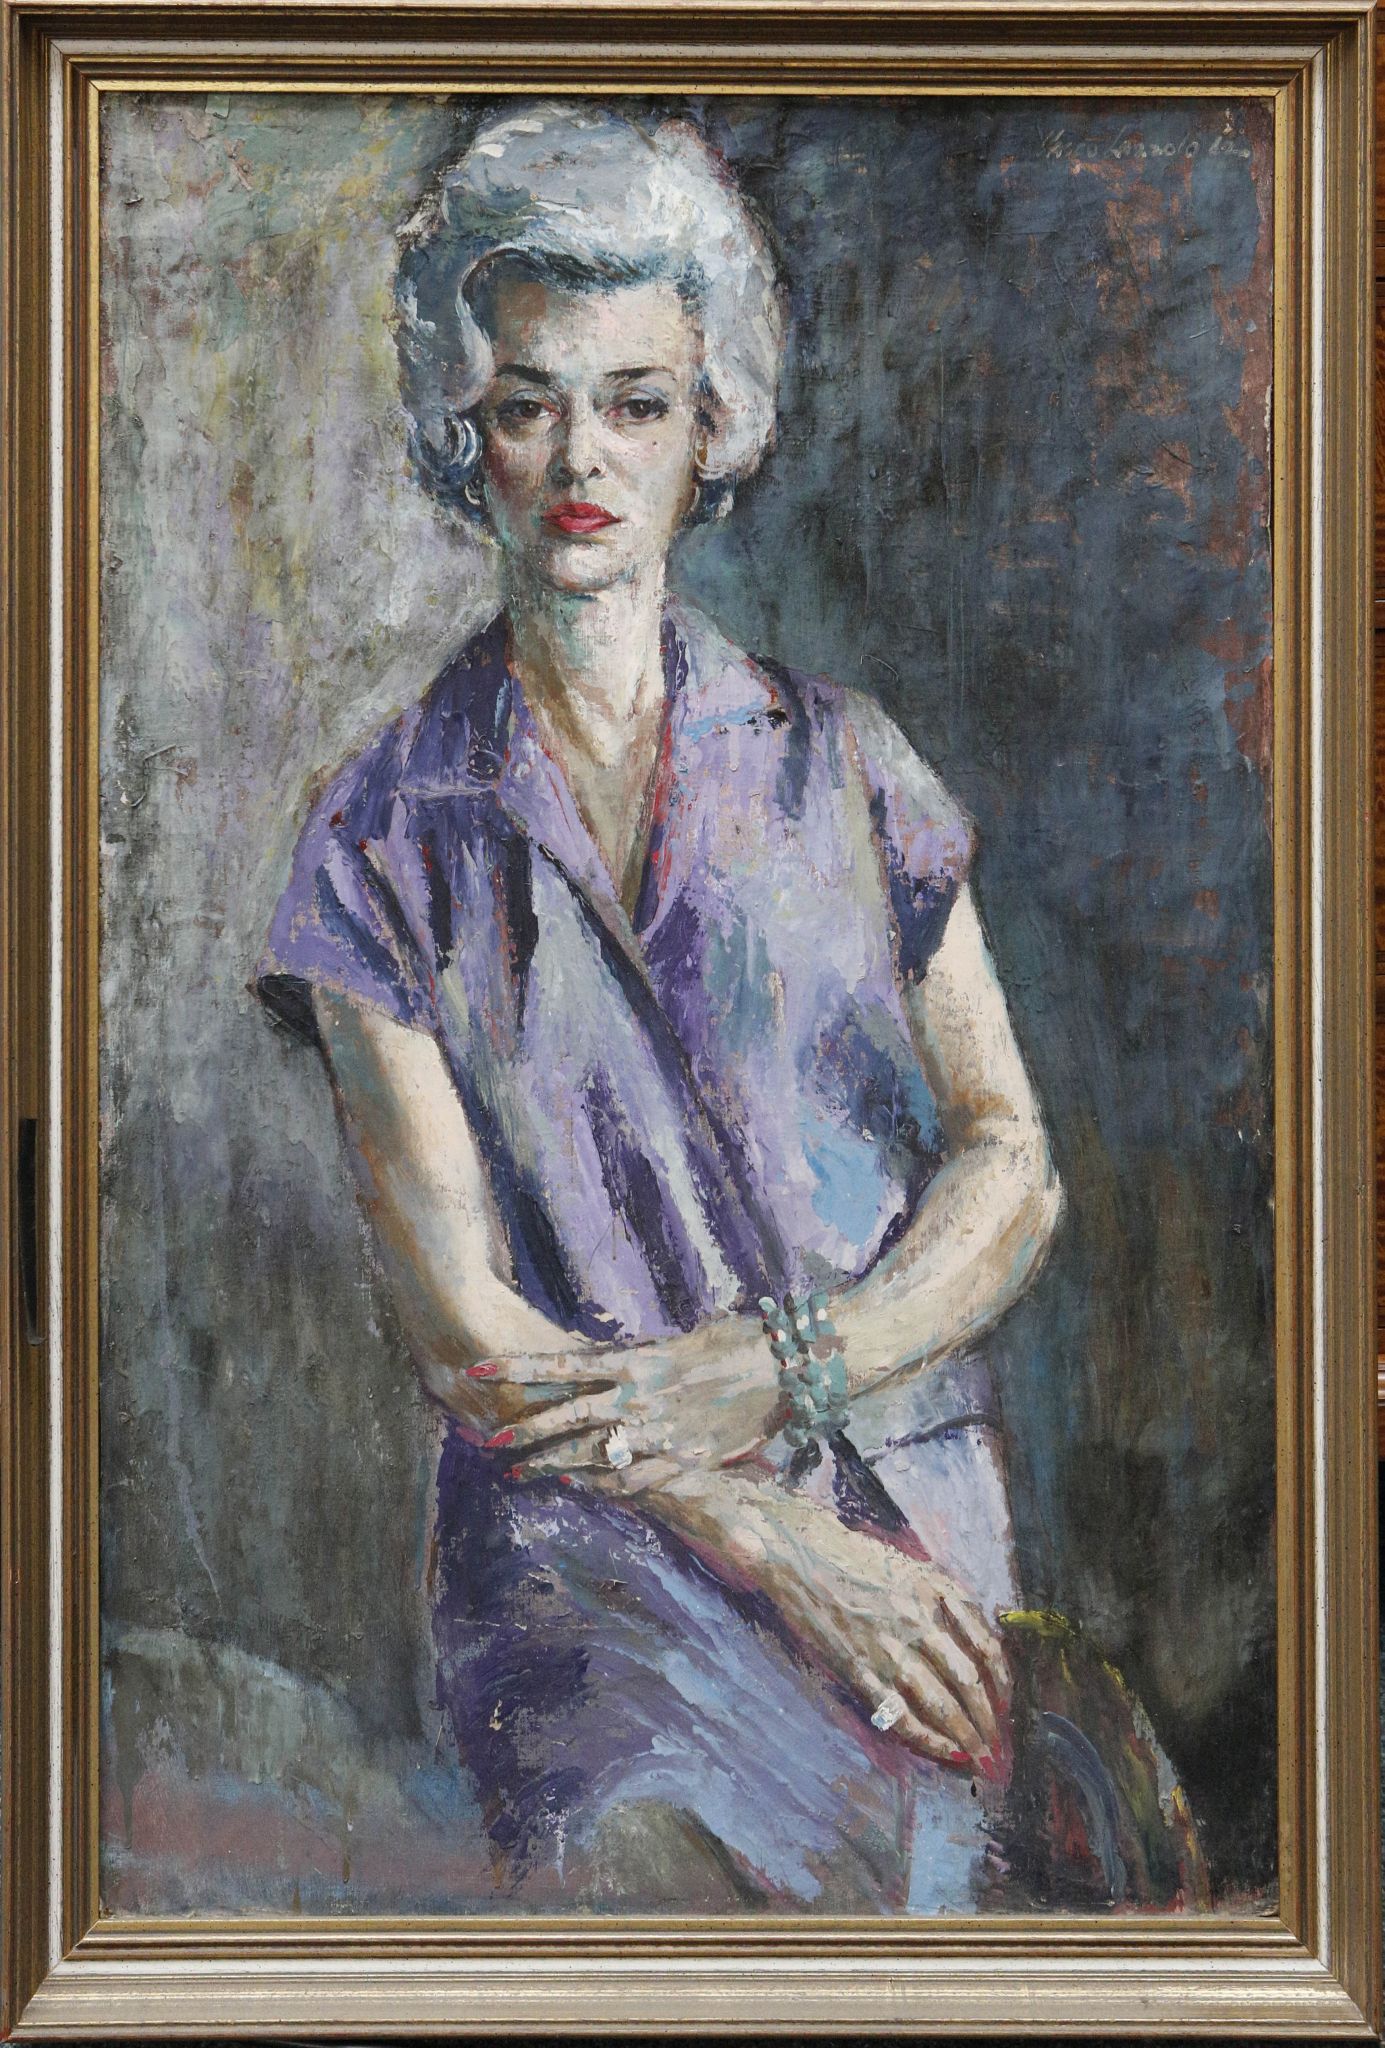 Vasco Lazzolo, oil on panel, portrait of the artist's wife, signed and dated '62, framed, 90 x 60cm